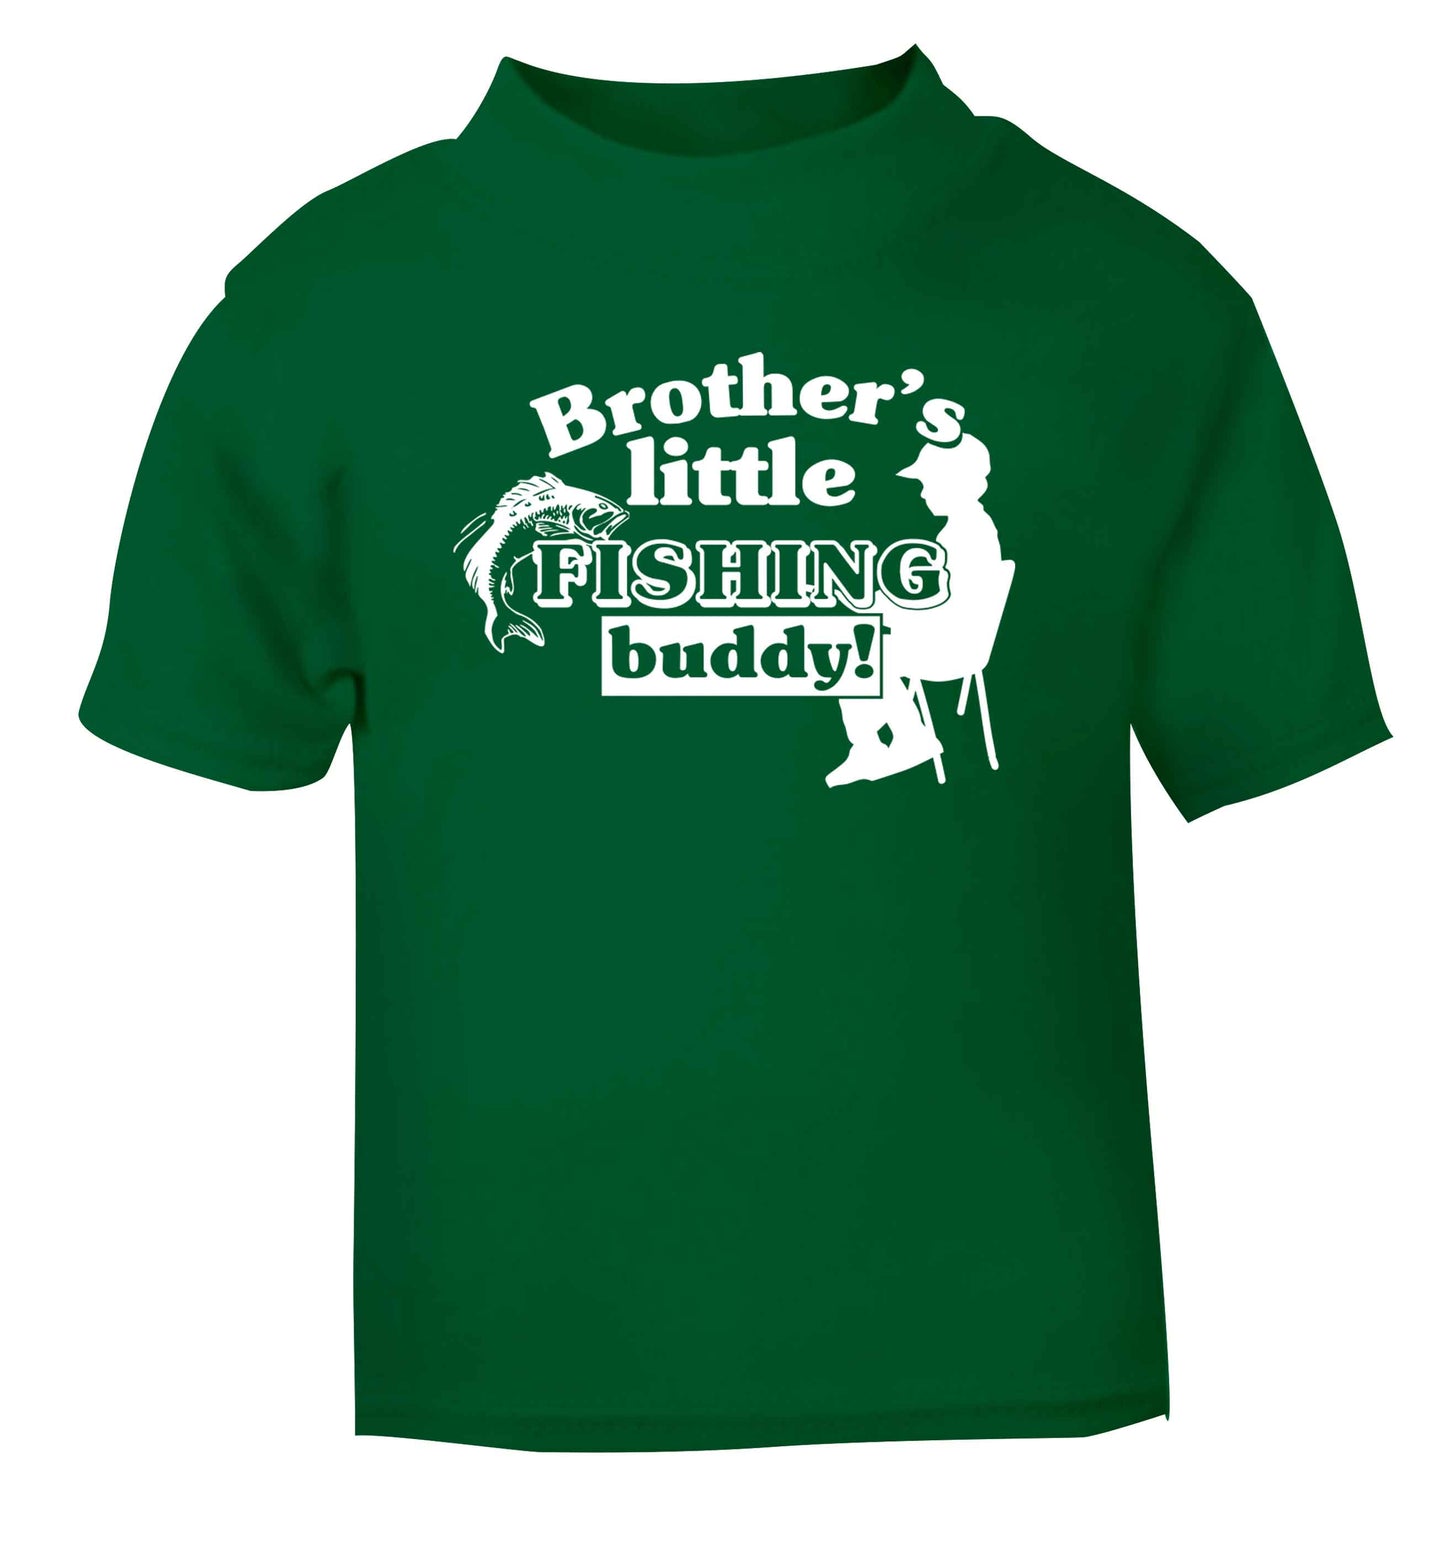 Brother's little fishing buddy green Baby Toddler Tshirt 2 Years